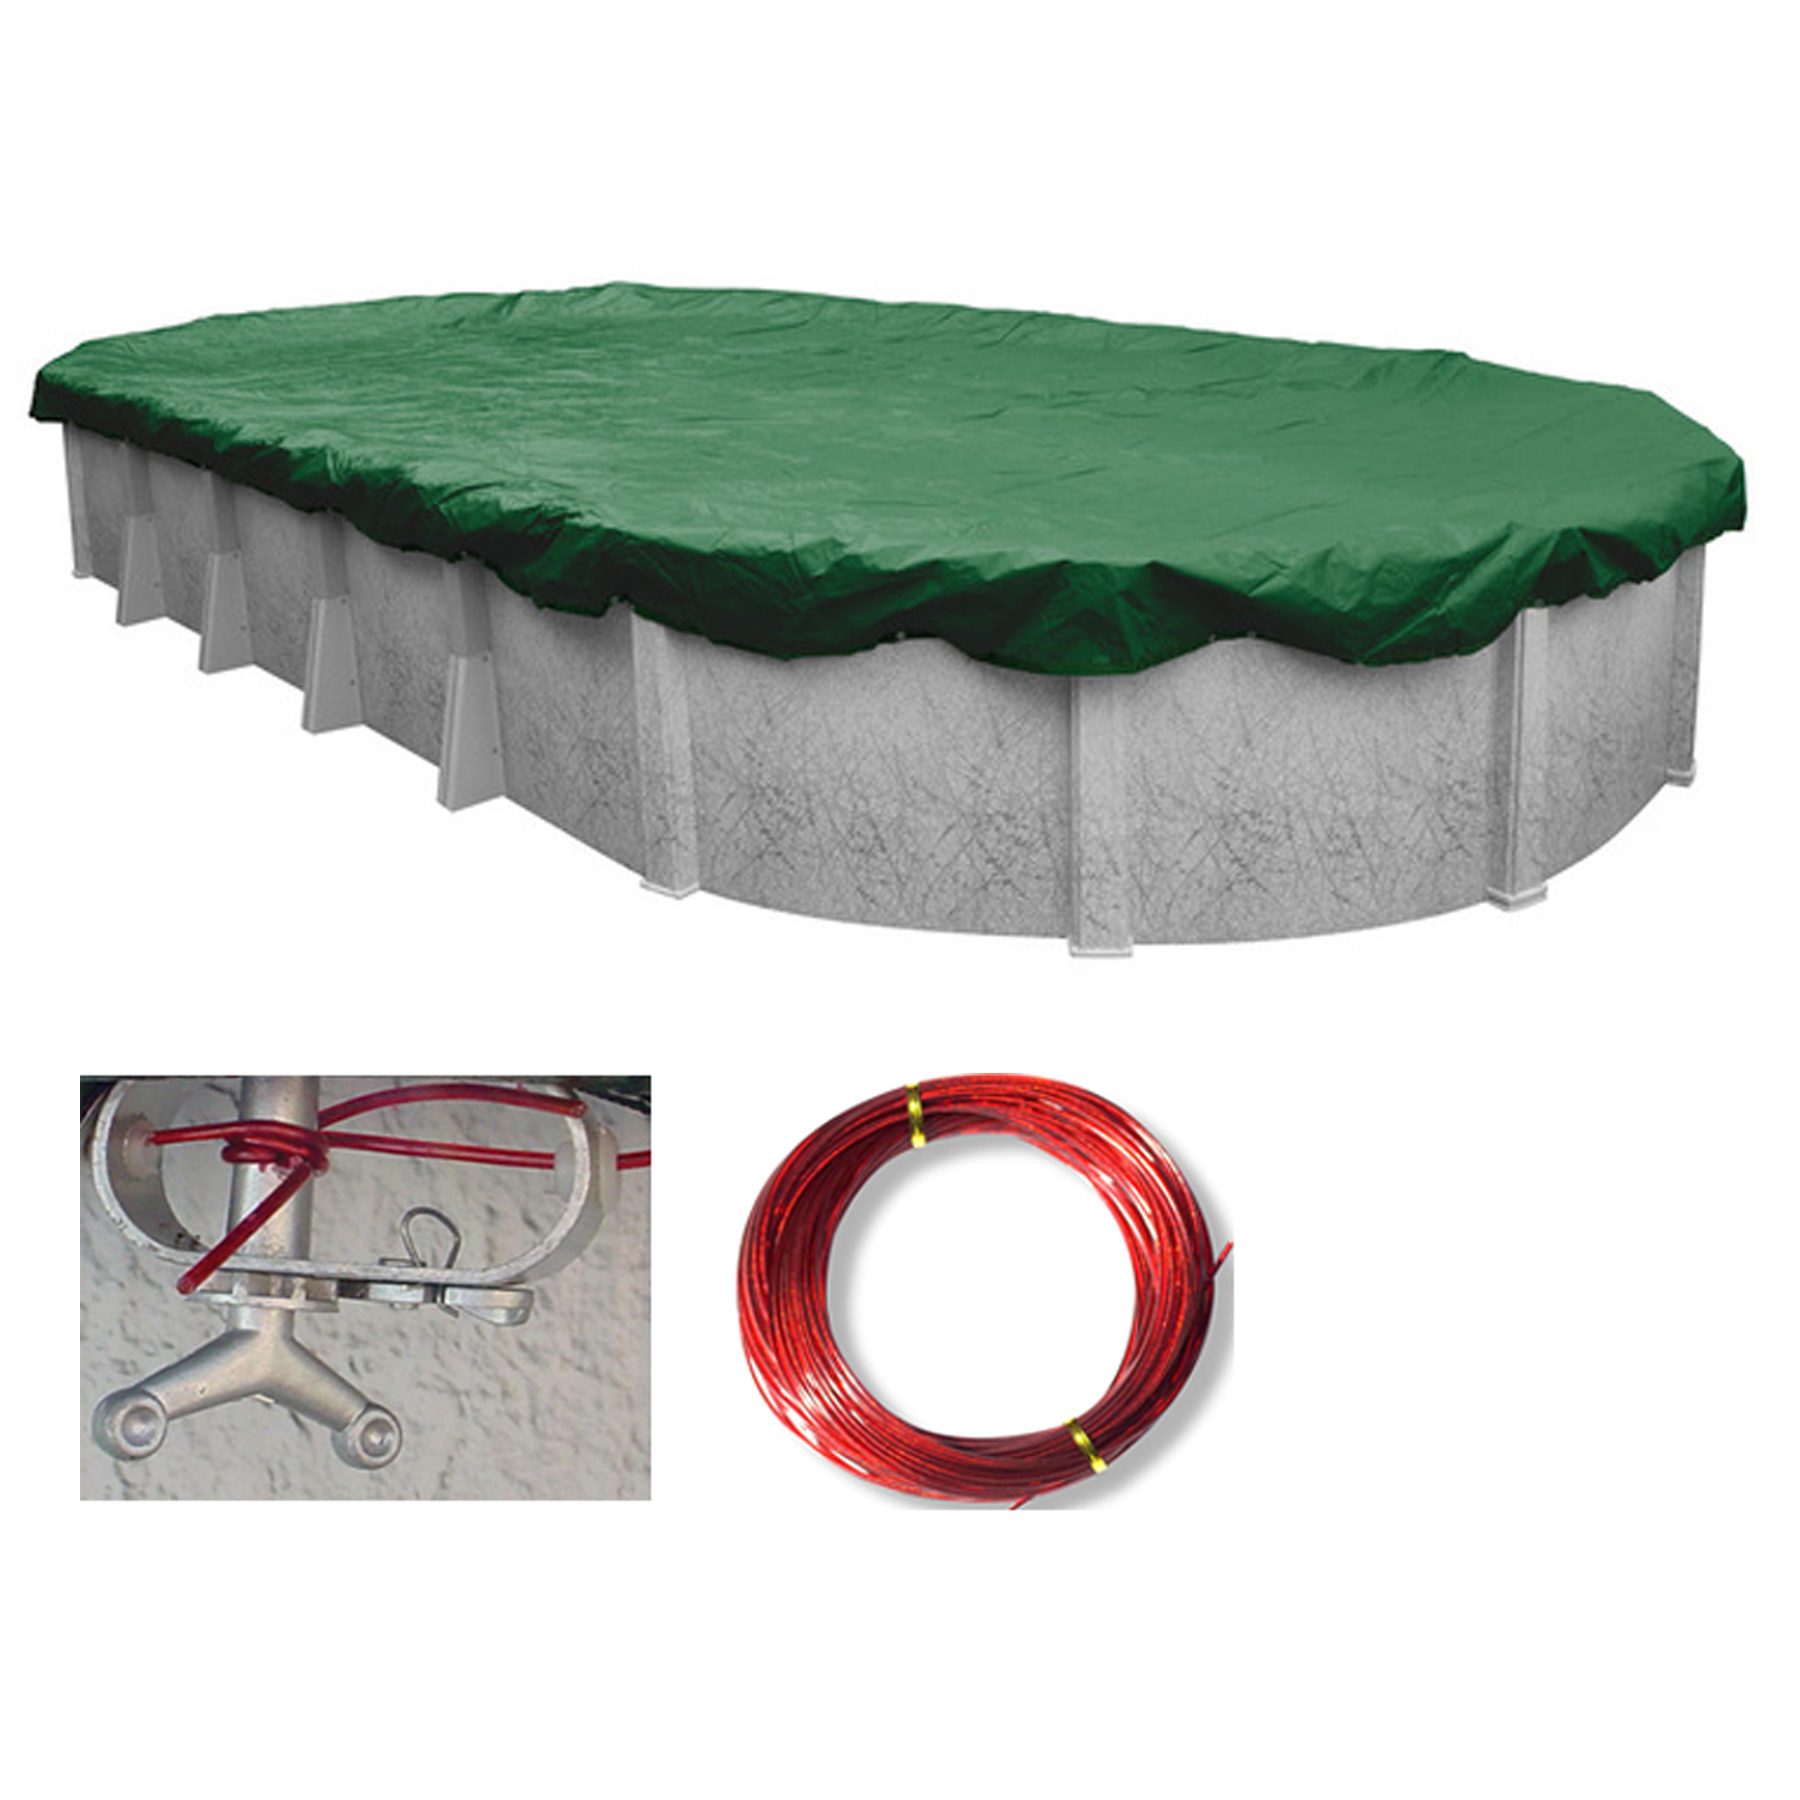 Ripstopper® Green Winter Cover with Closing Kit for 18' x 34' Oval Pool